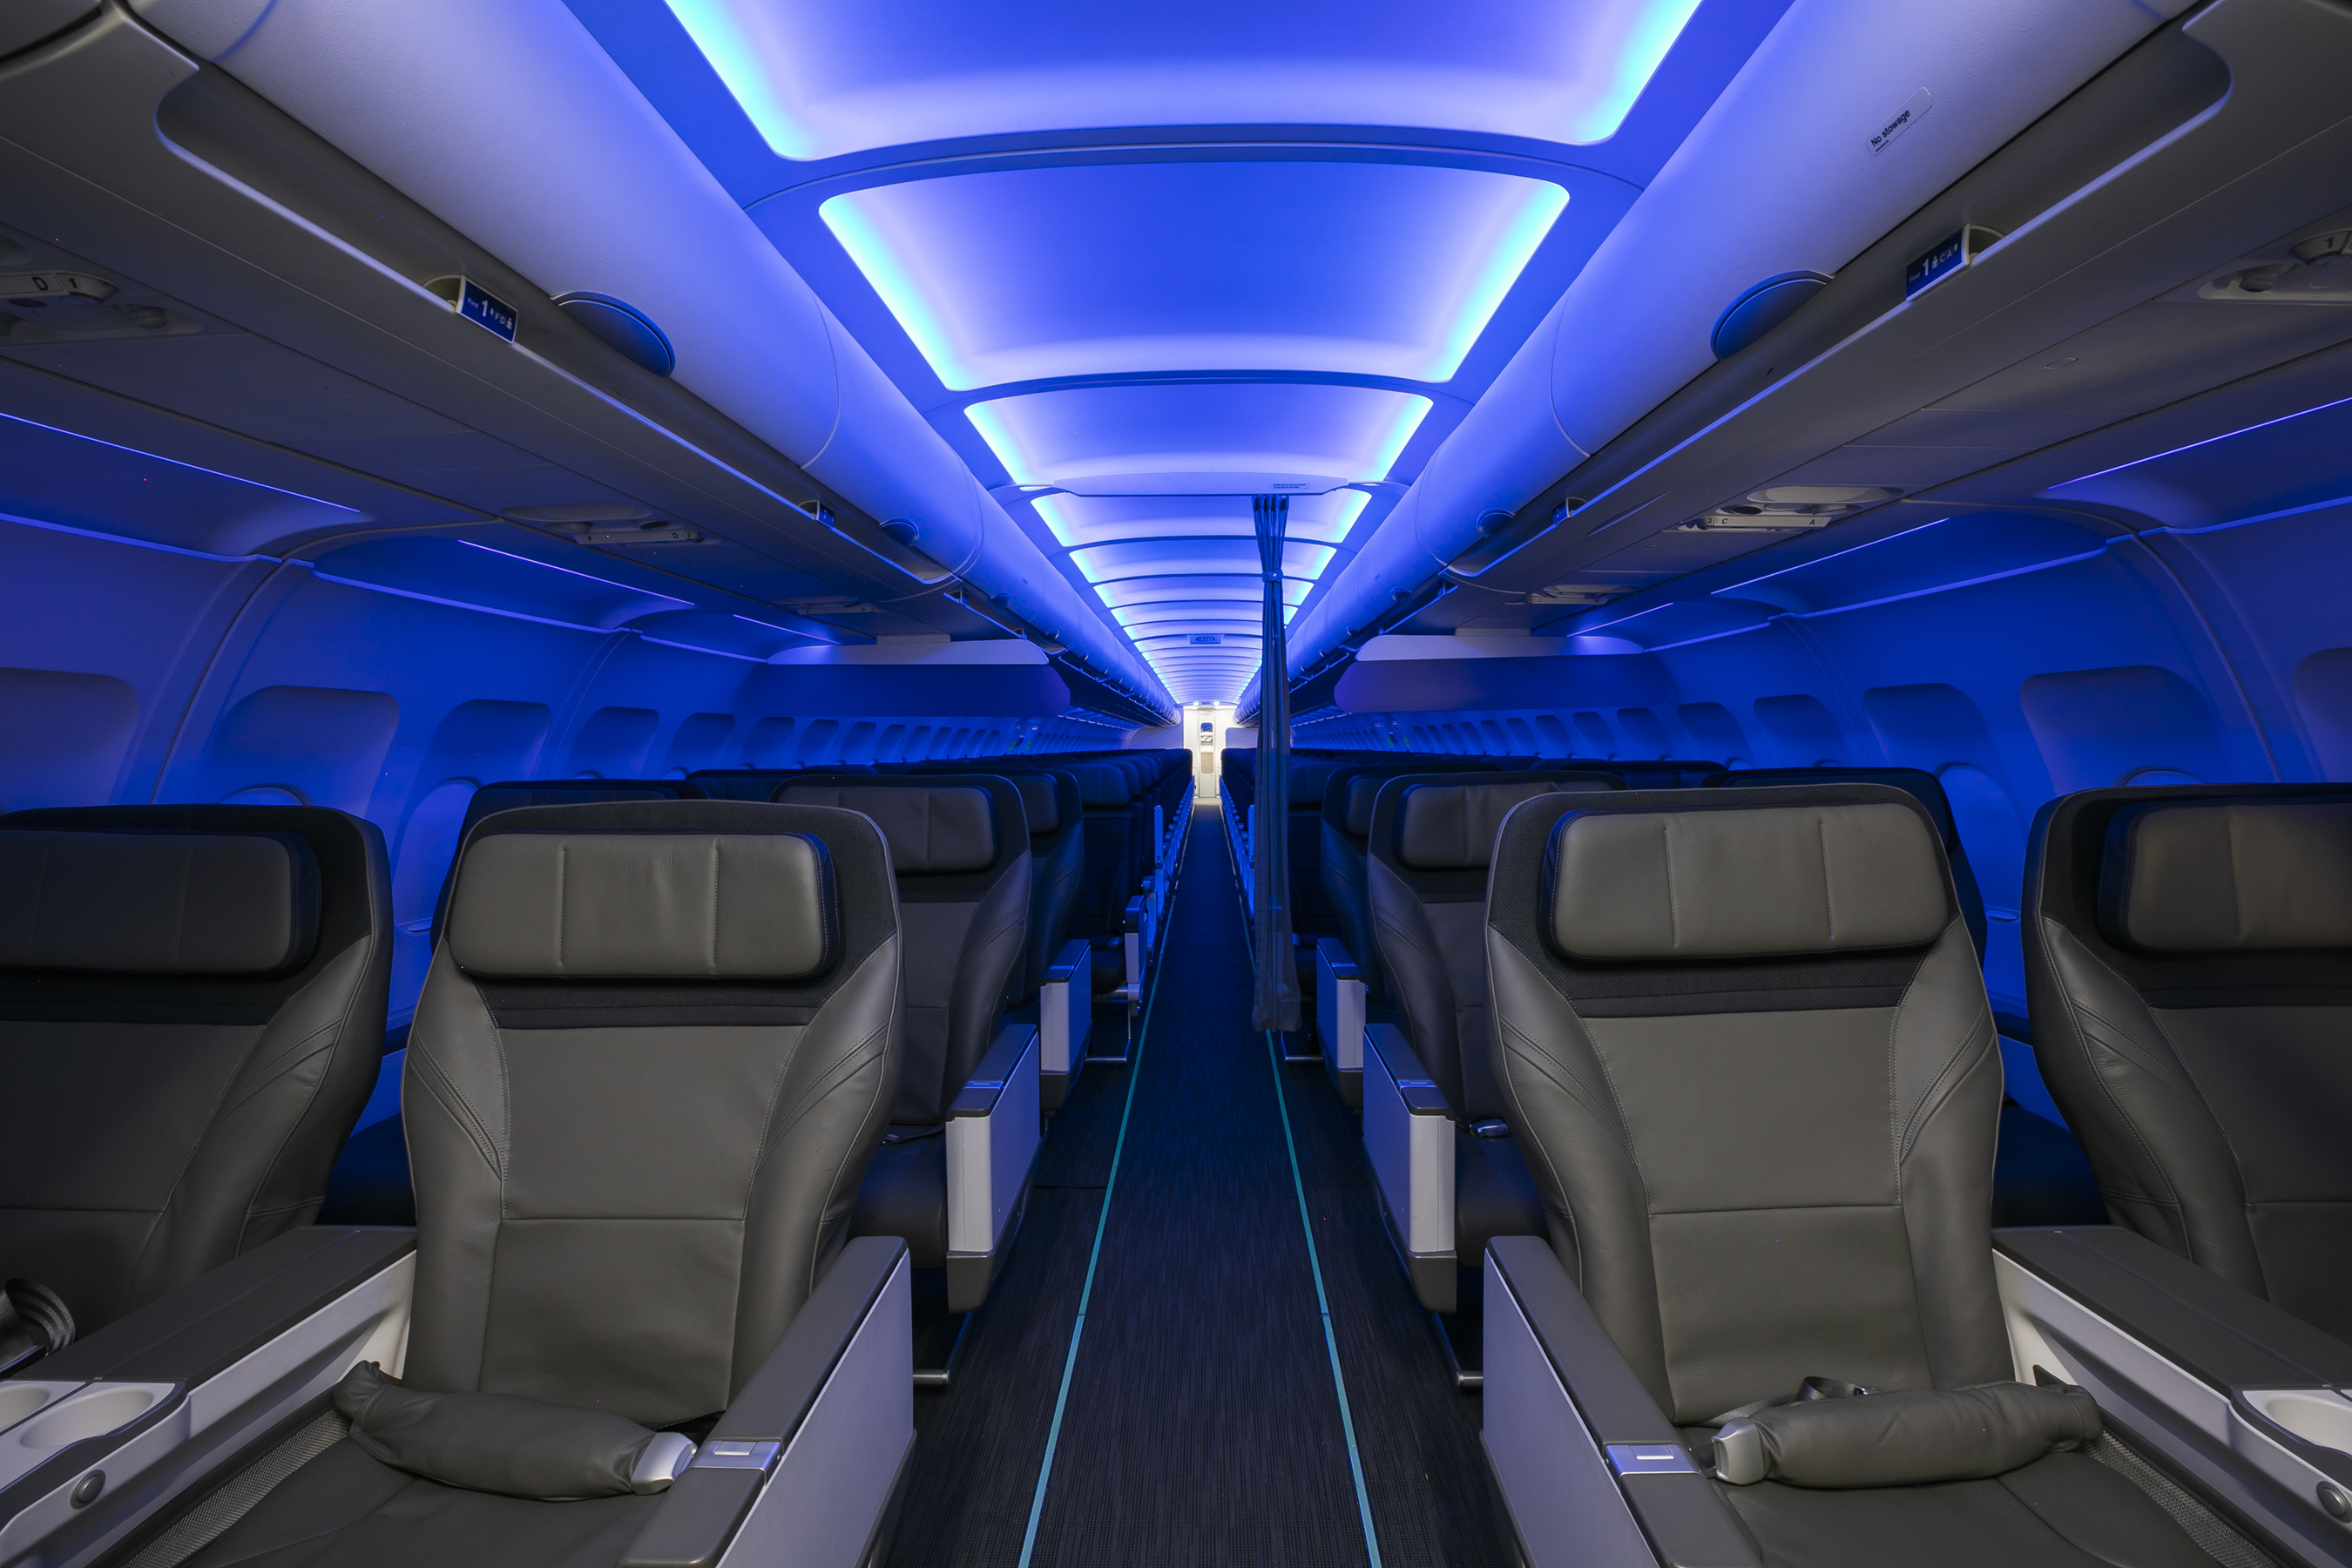 Alaska Airlines rolls out elevated guest experience with a redesigned cabin